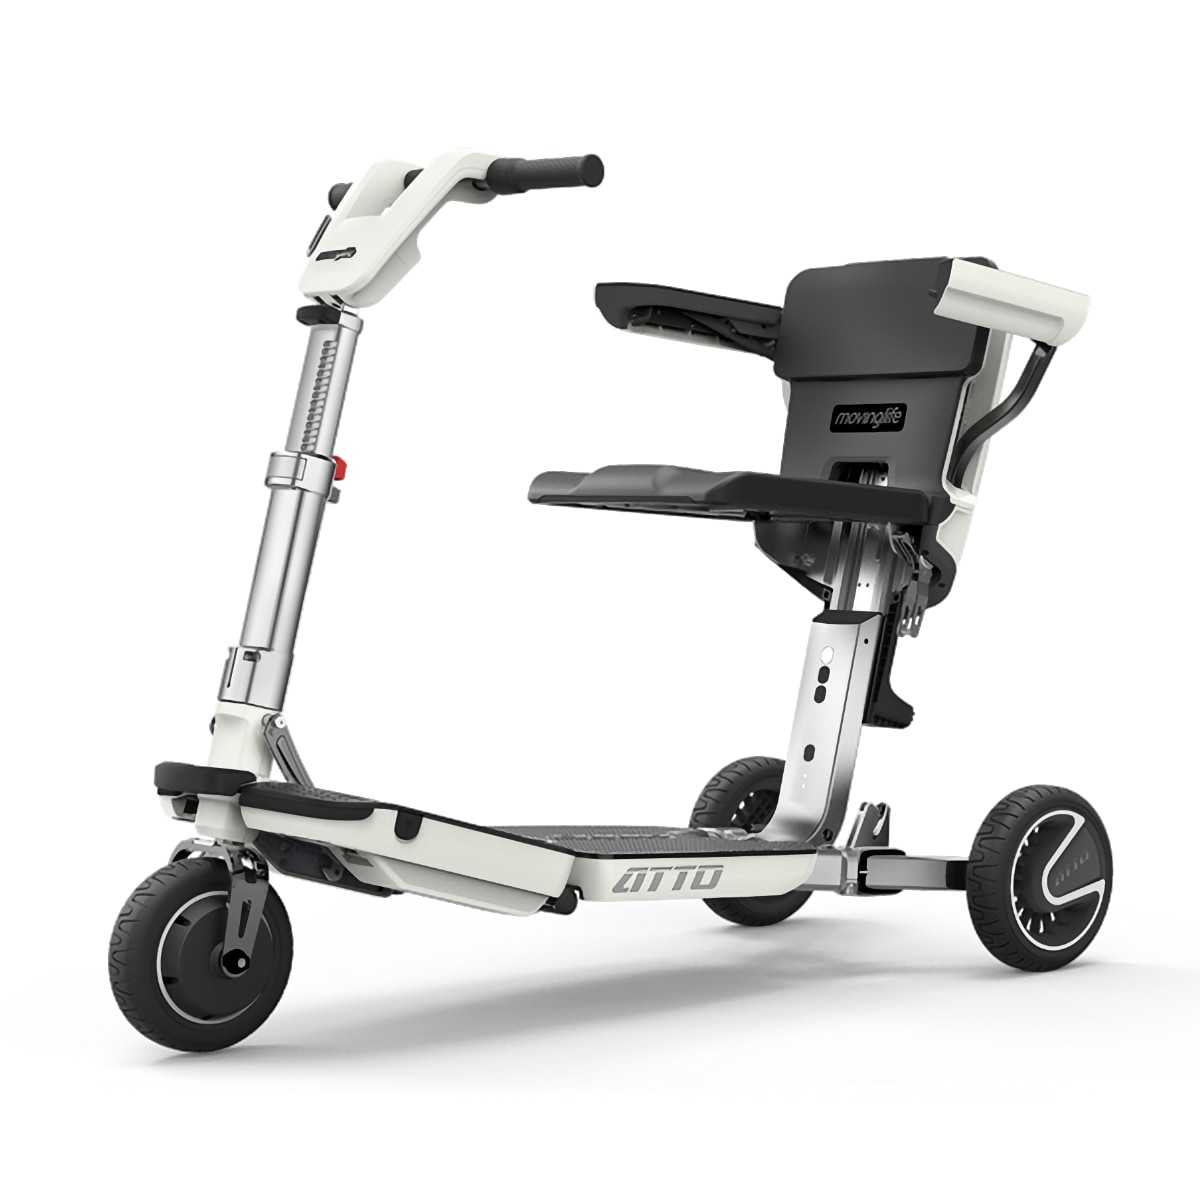 Sleek scooter with white and black accents from the Atto brand